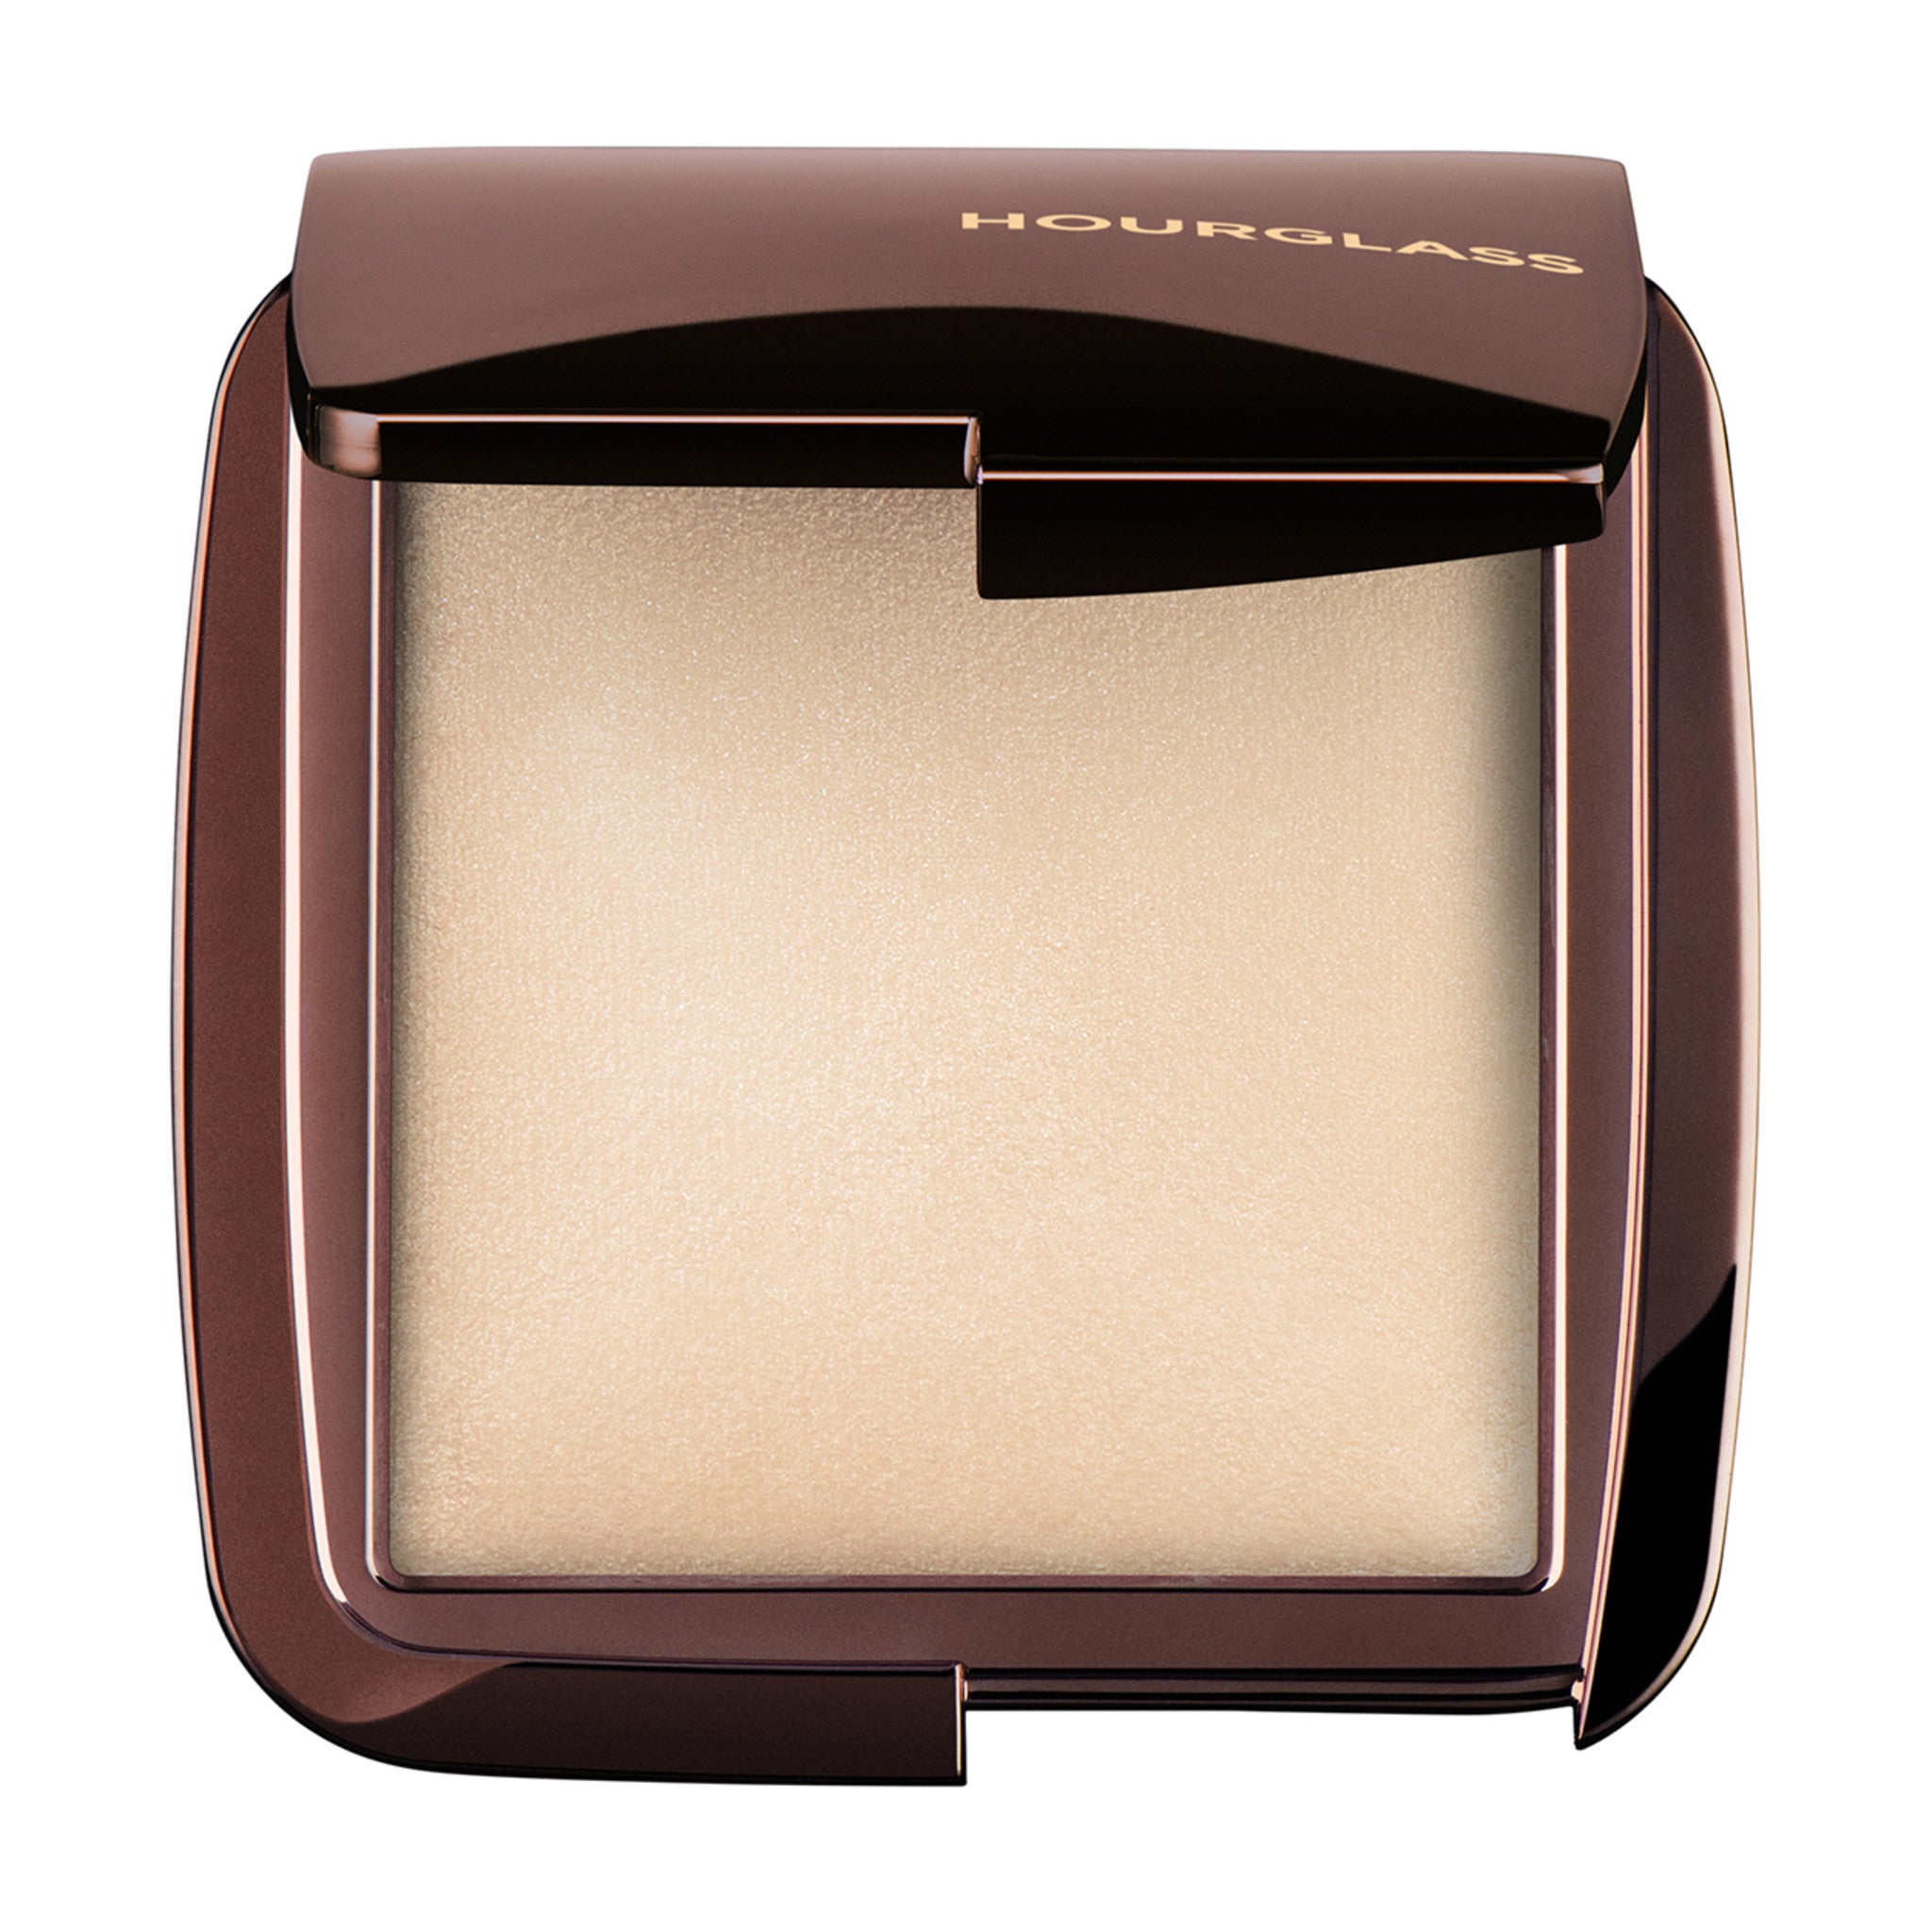 Hourglass Ambient Lighting Powder Color/Shade variant: Diffused Light main image. This product is for medium complexions